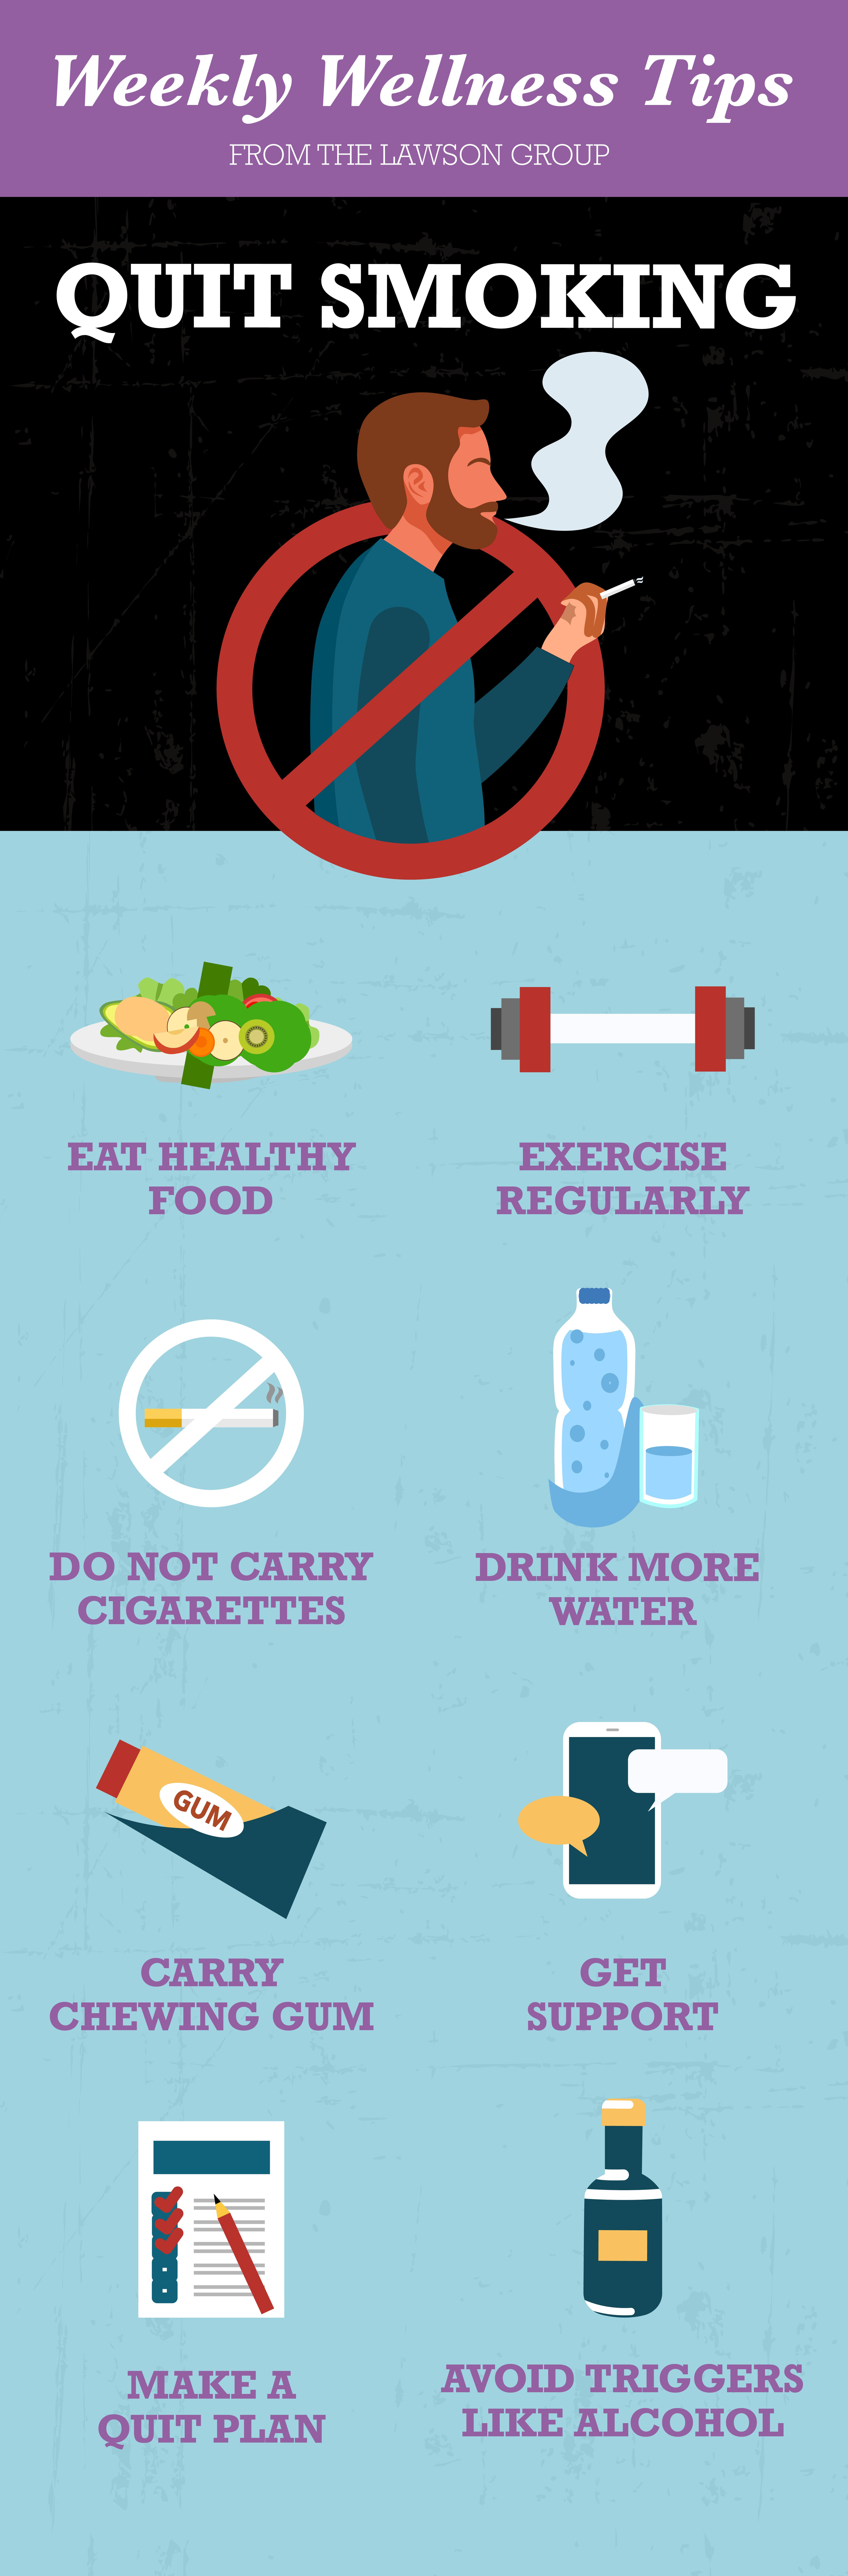 TLG22005 Wellness Tips - Quit Smoking Infographic-1080px-01